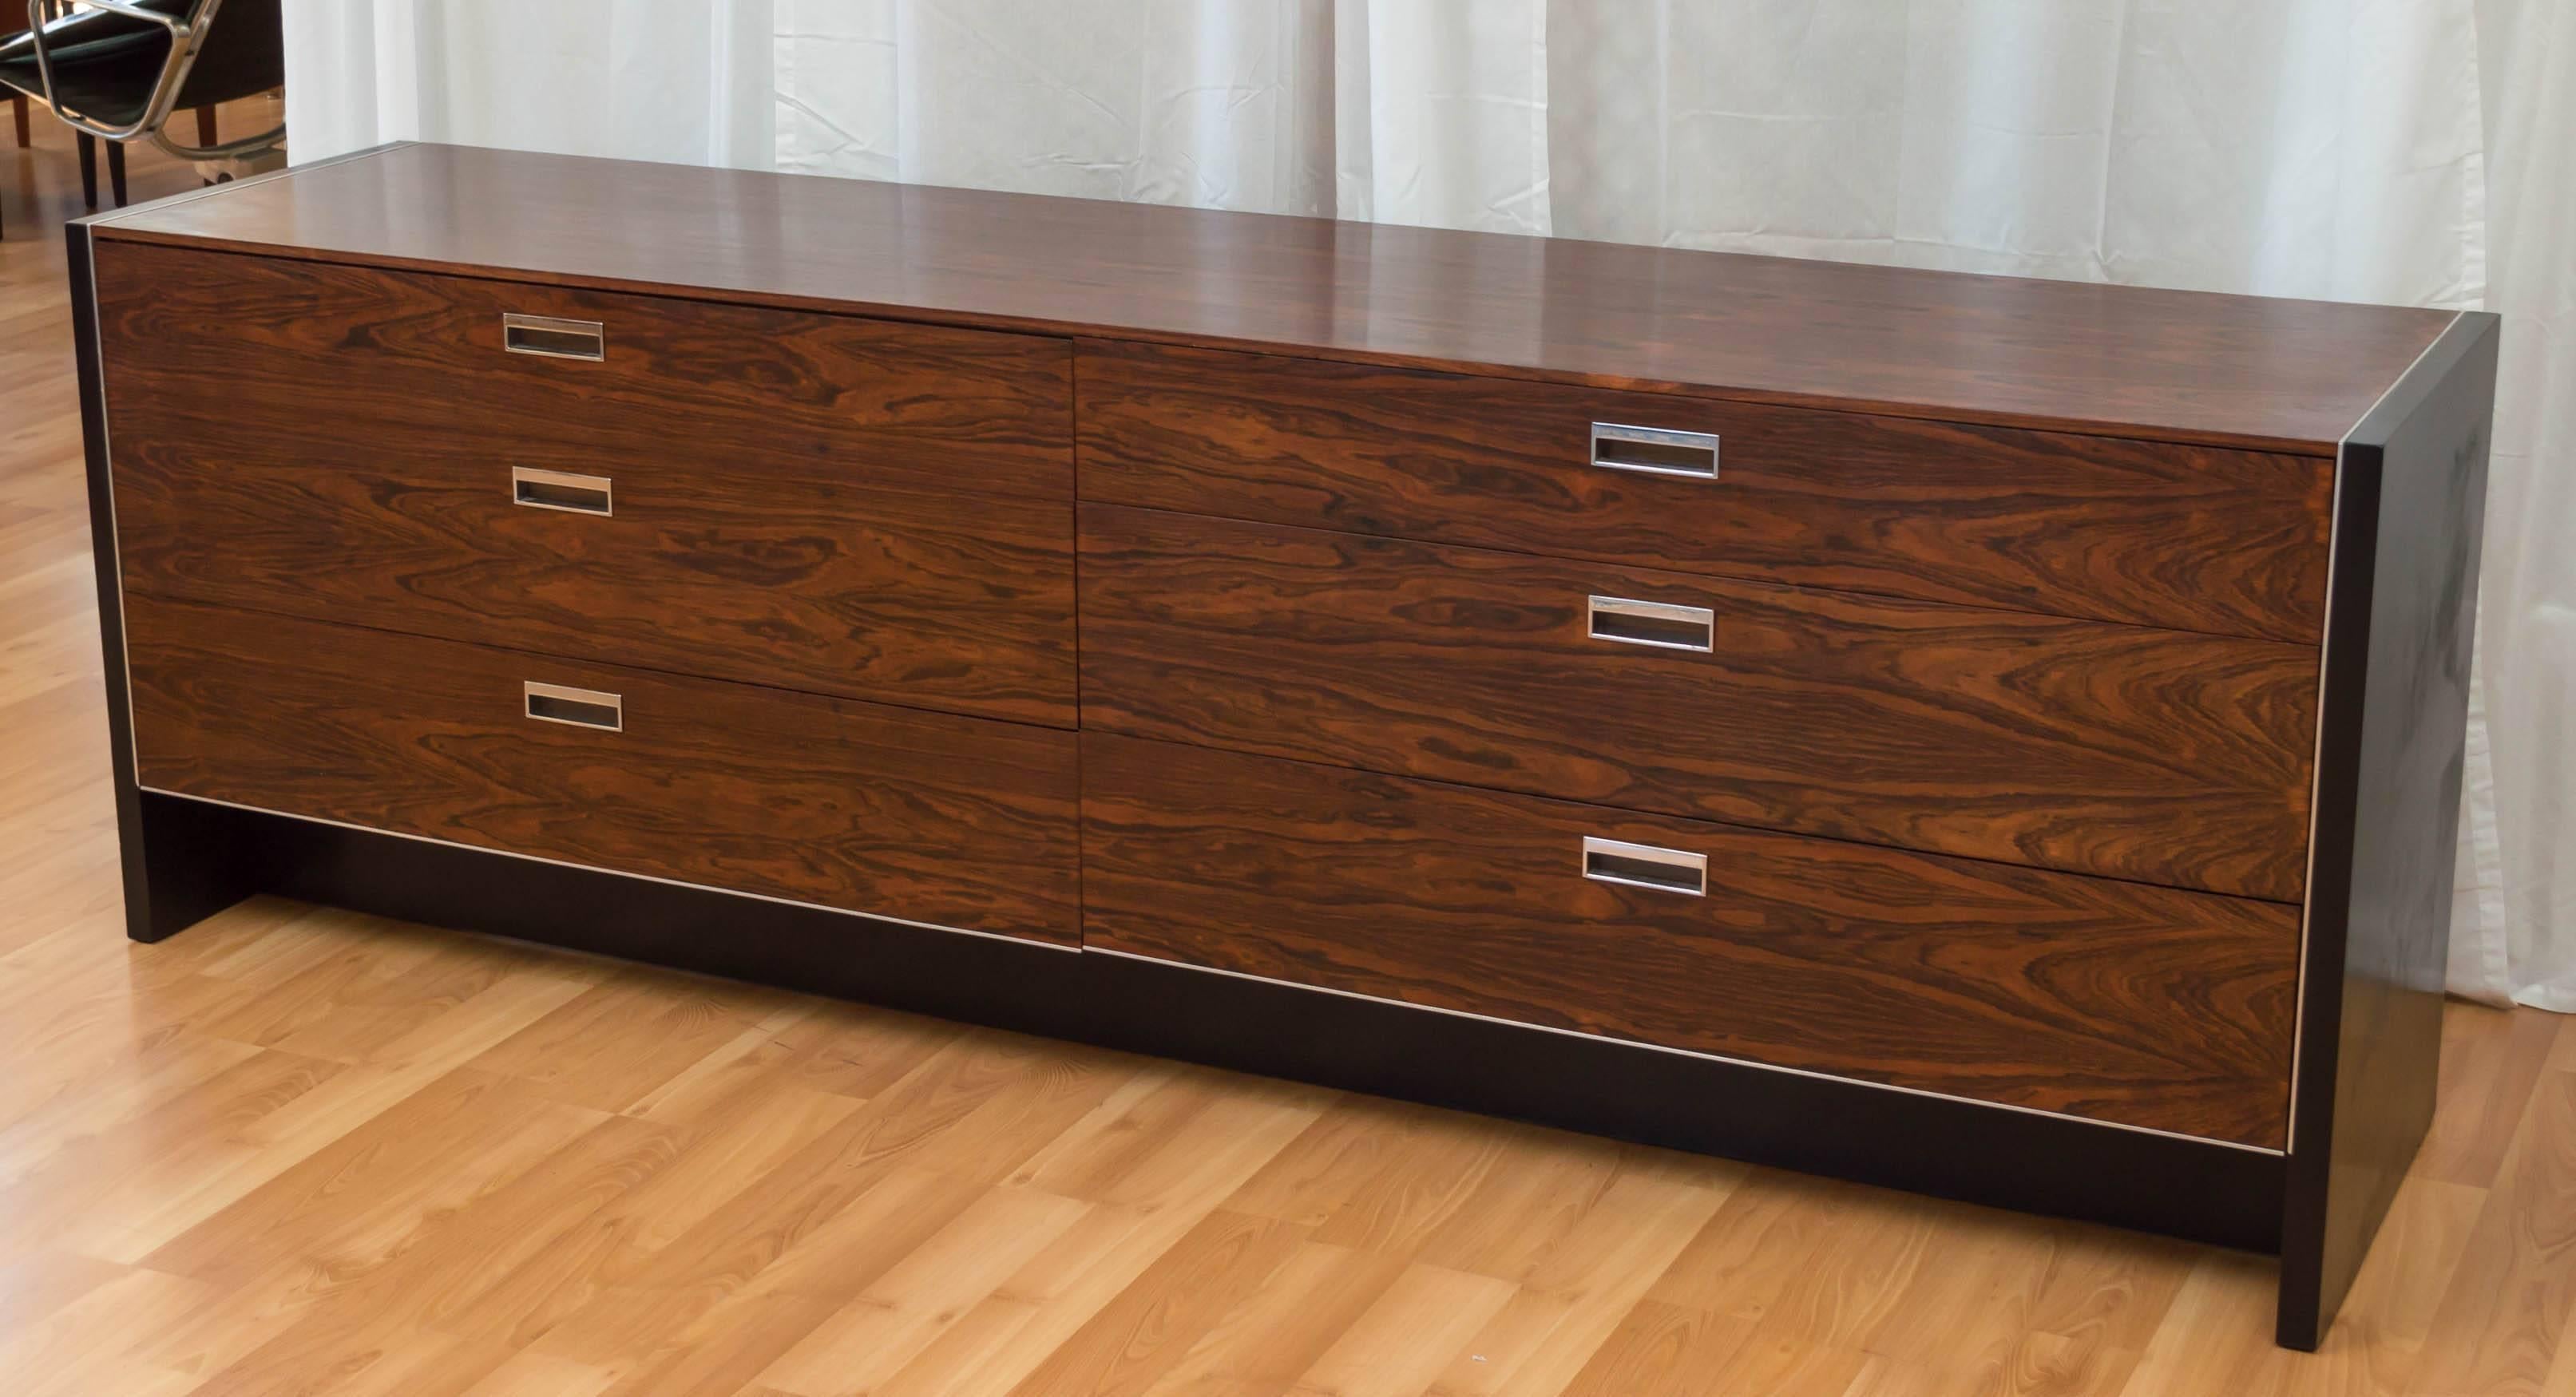 An exceptionally handsome and expansive six-drawer rosewood dresser with ebonized oak frame and chrome hardware by Robert Baron for Glenn of California.

Richly grained rosewood veneer is presented in one gorgeous piece on top, and is beautifully